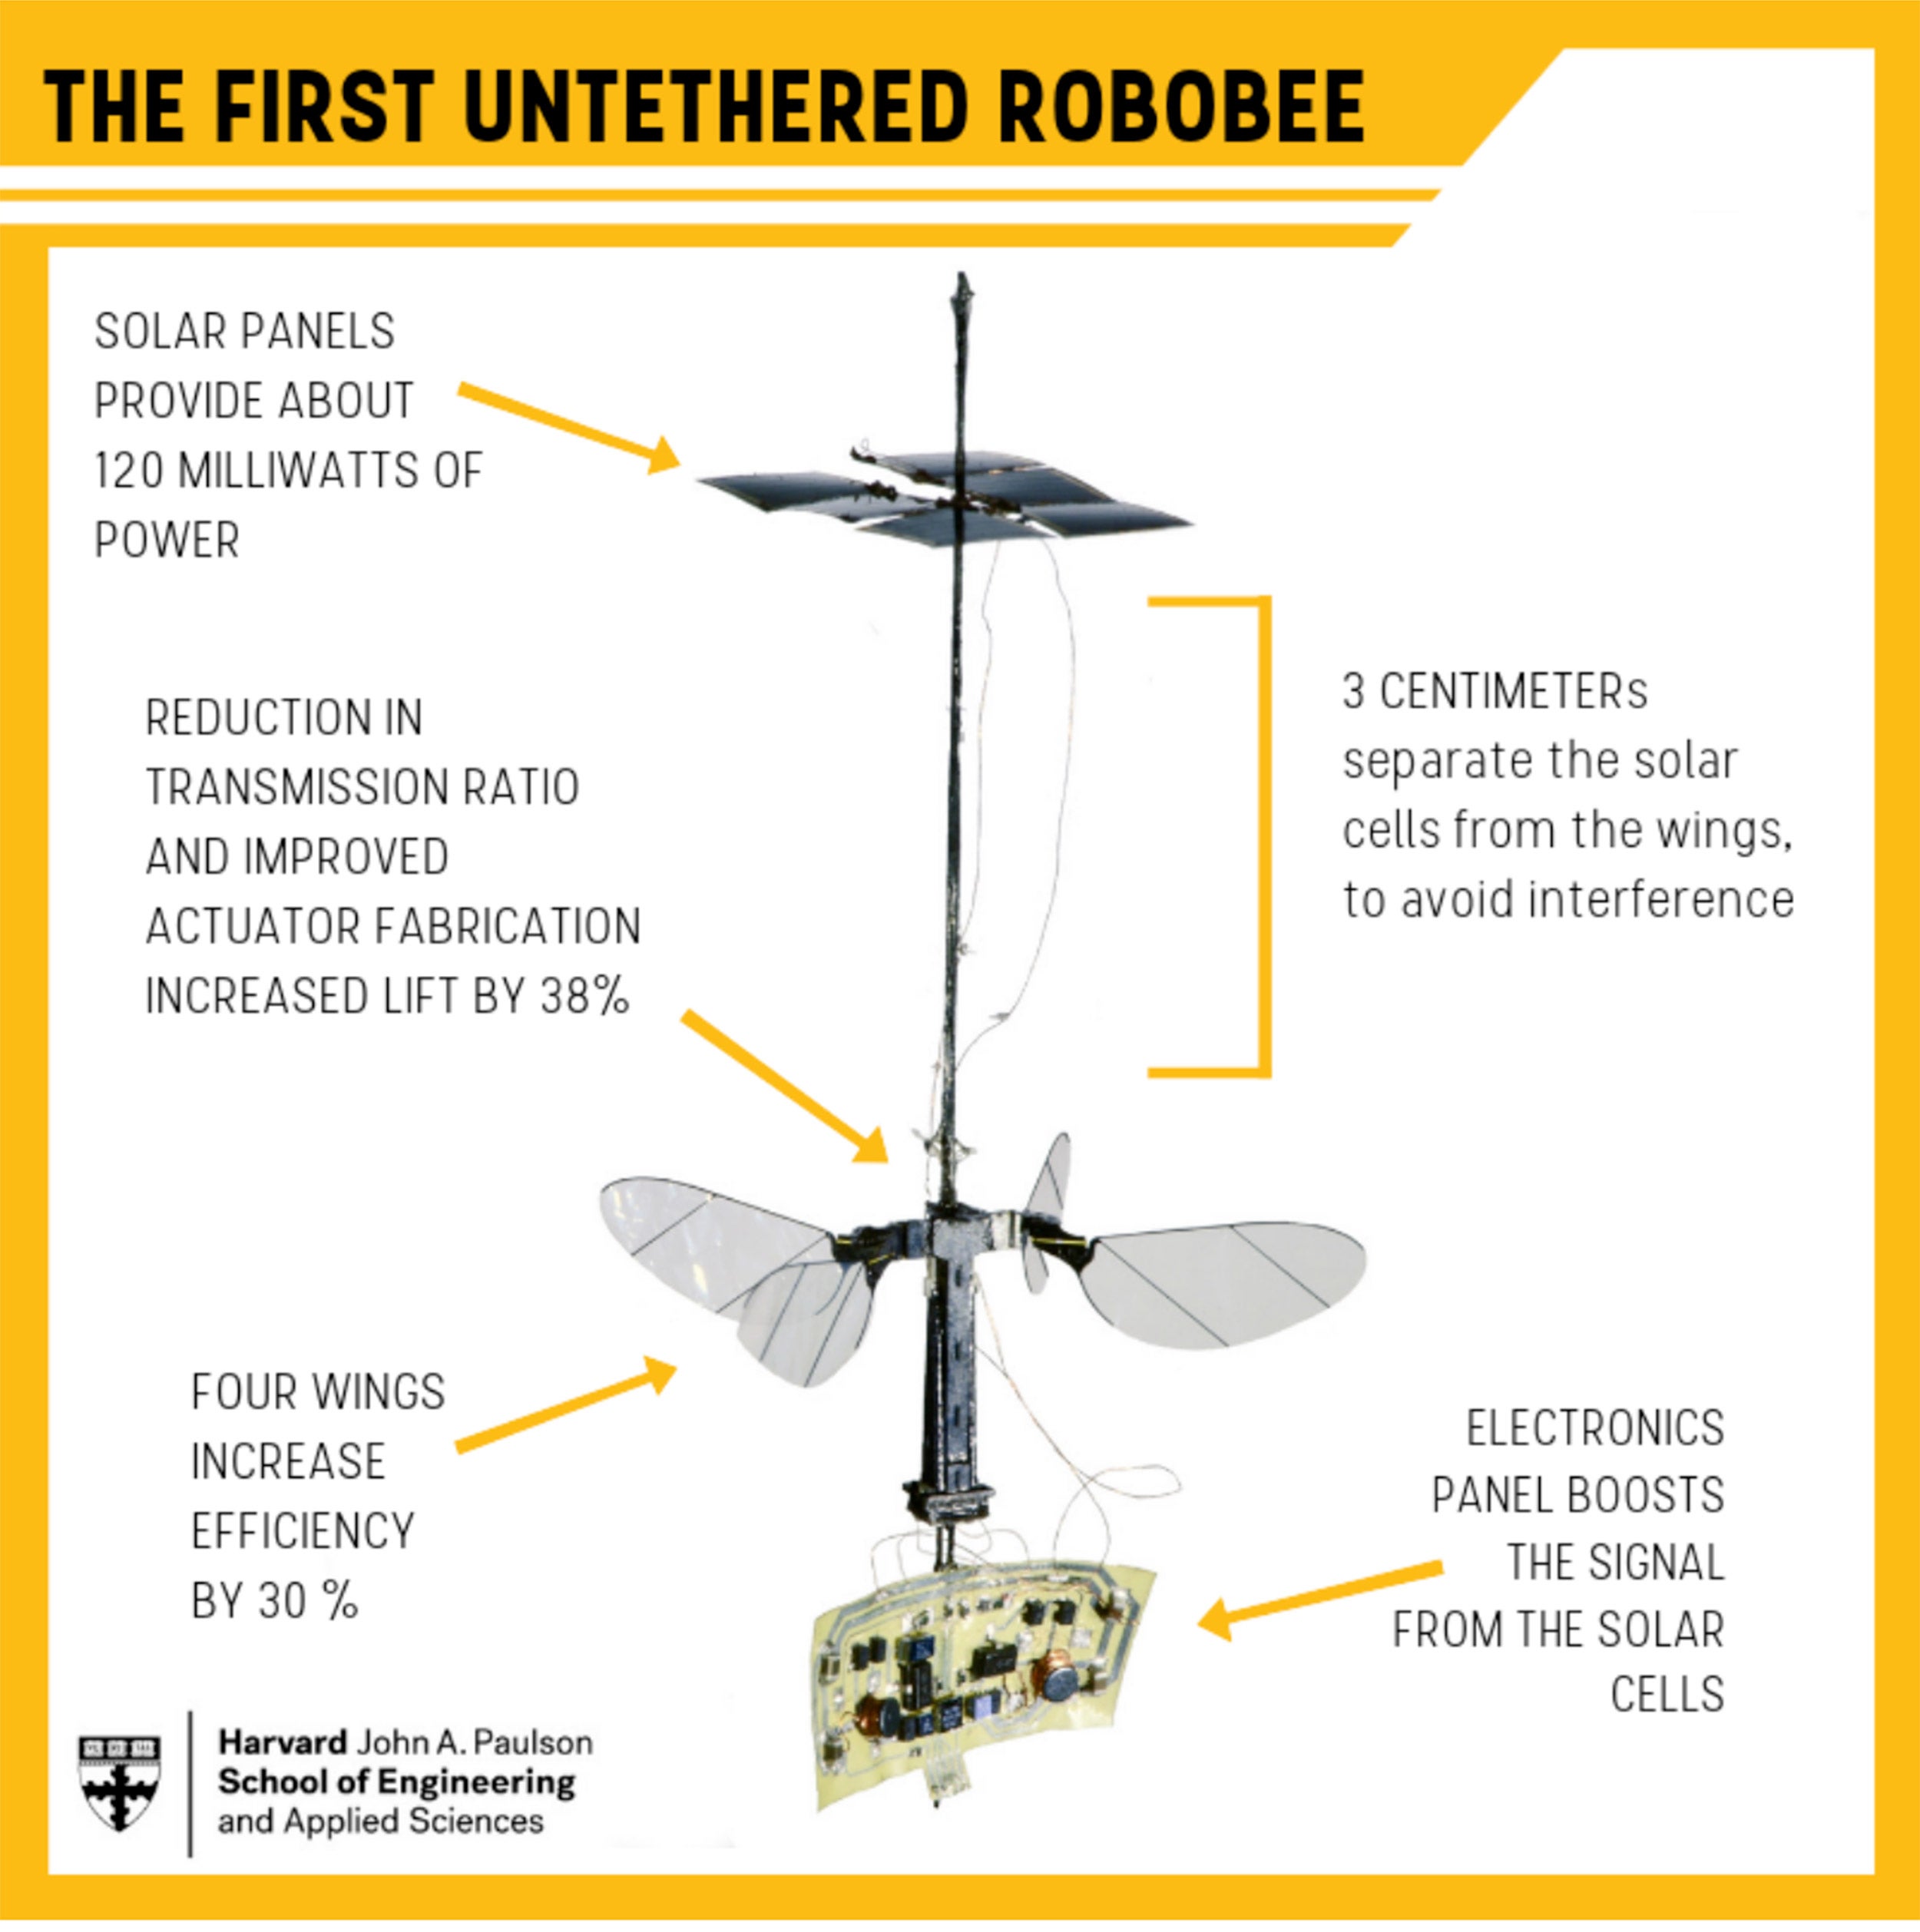 RoboBee card with design information